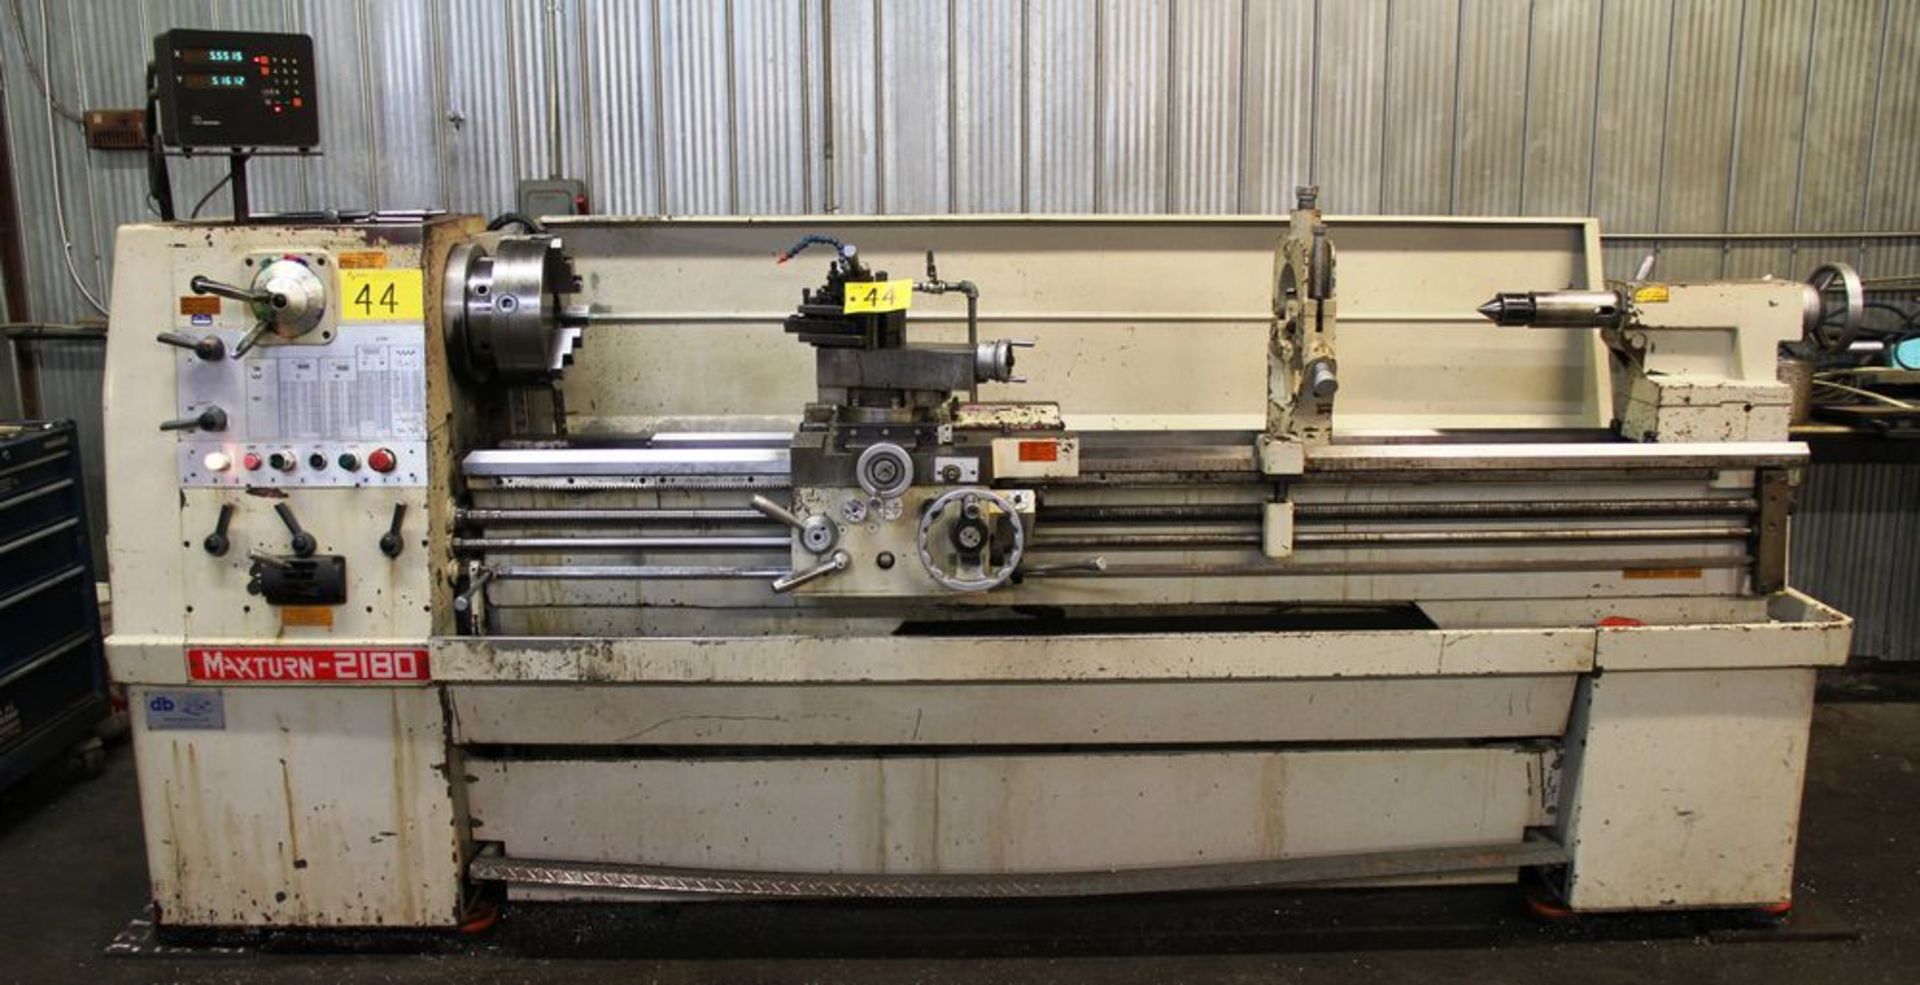 MAXTURN 2180 ENGINE LATHE, 21" SWING, 80" LONG BED, QUICK CHANGE TOOL POST, 3" SPINDLE BORE, 3 & 4